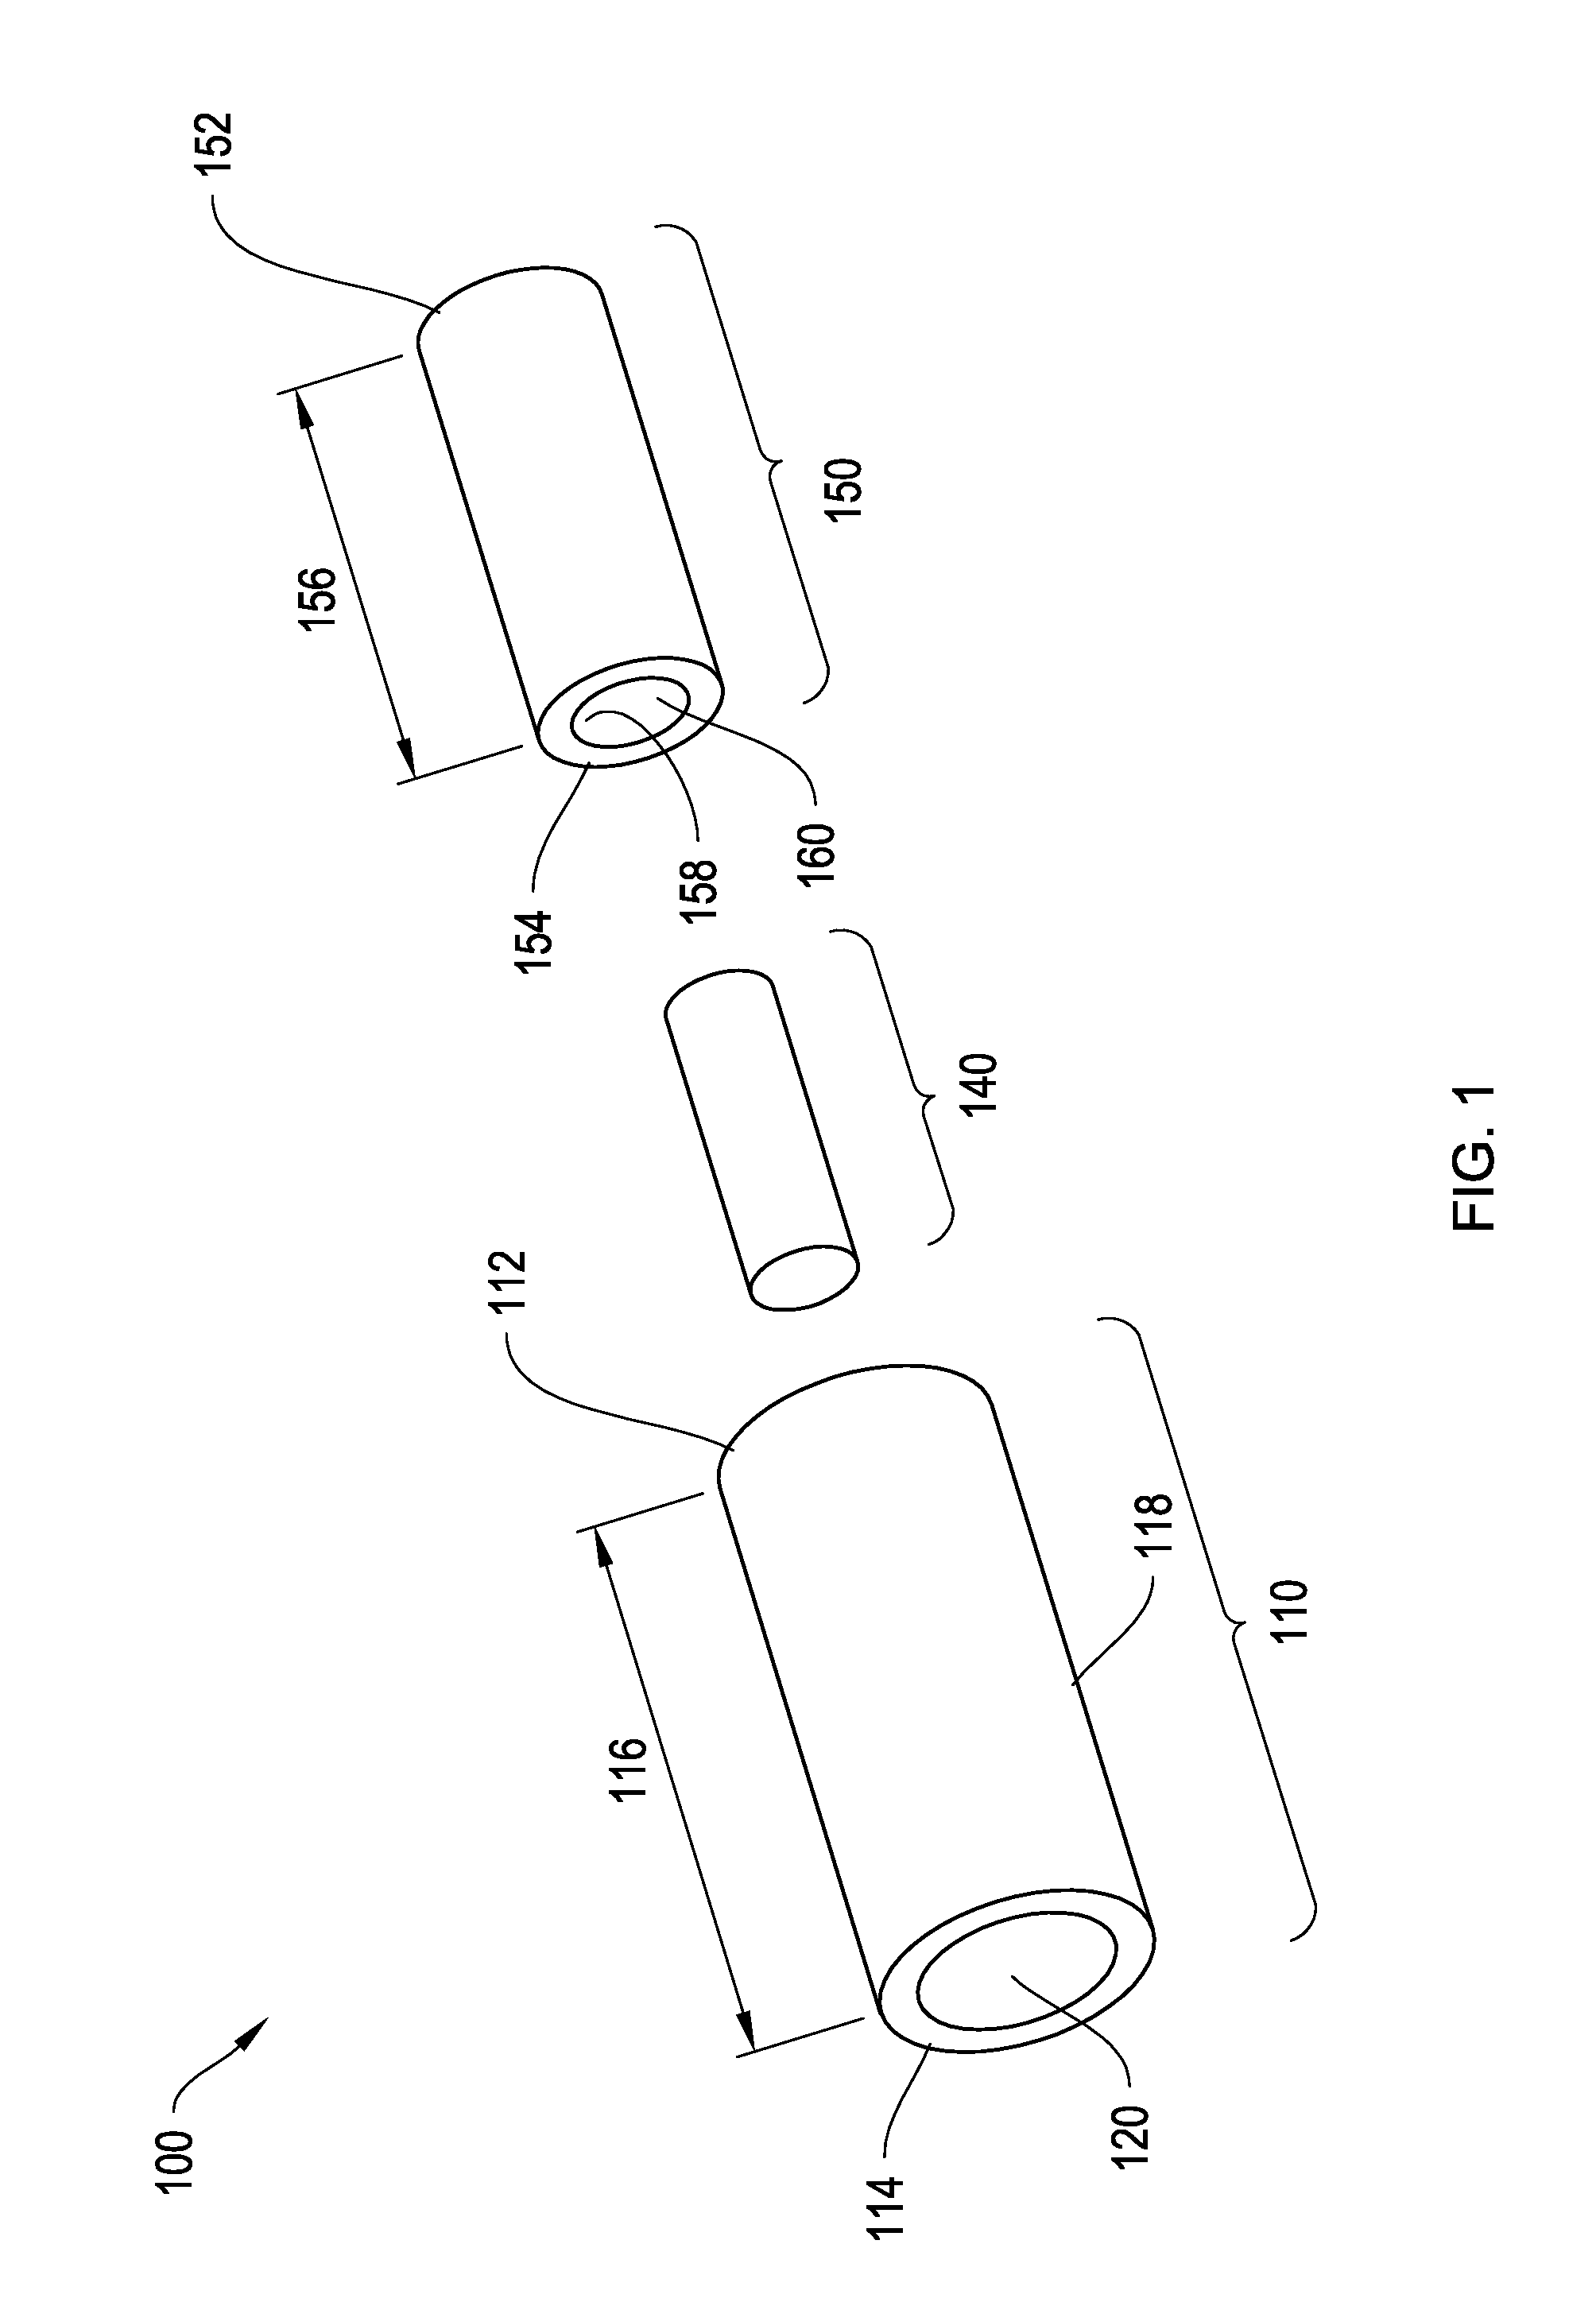 Two-piece injectable drug delivery device with heat-cured seal